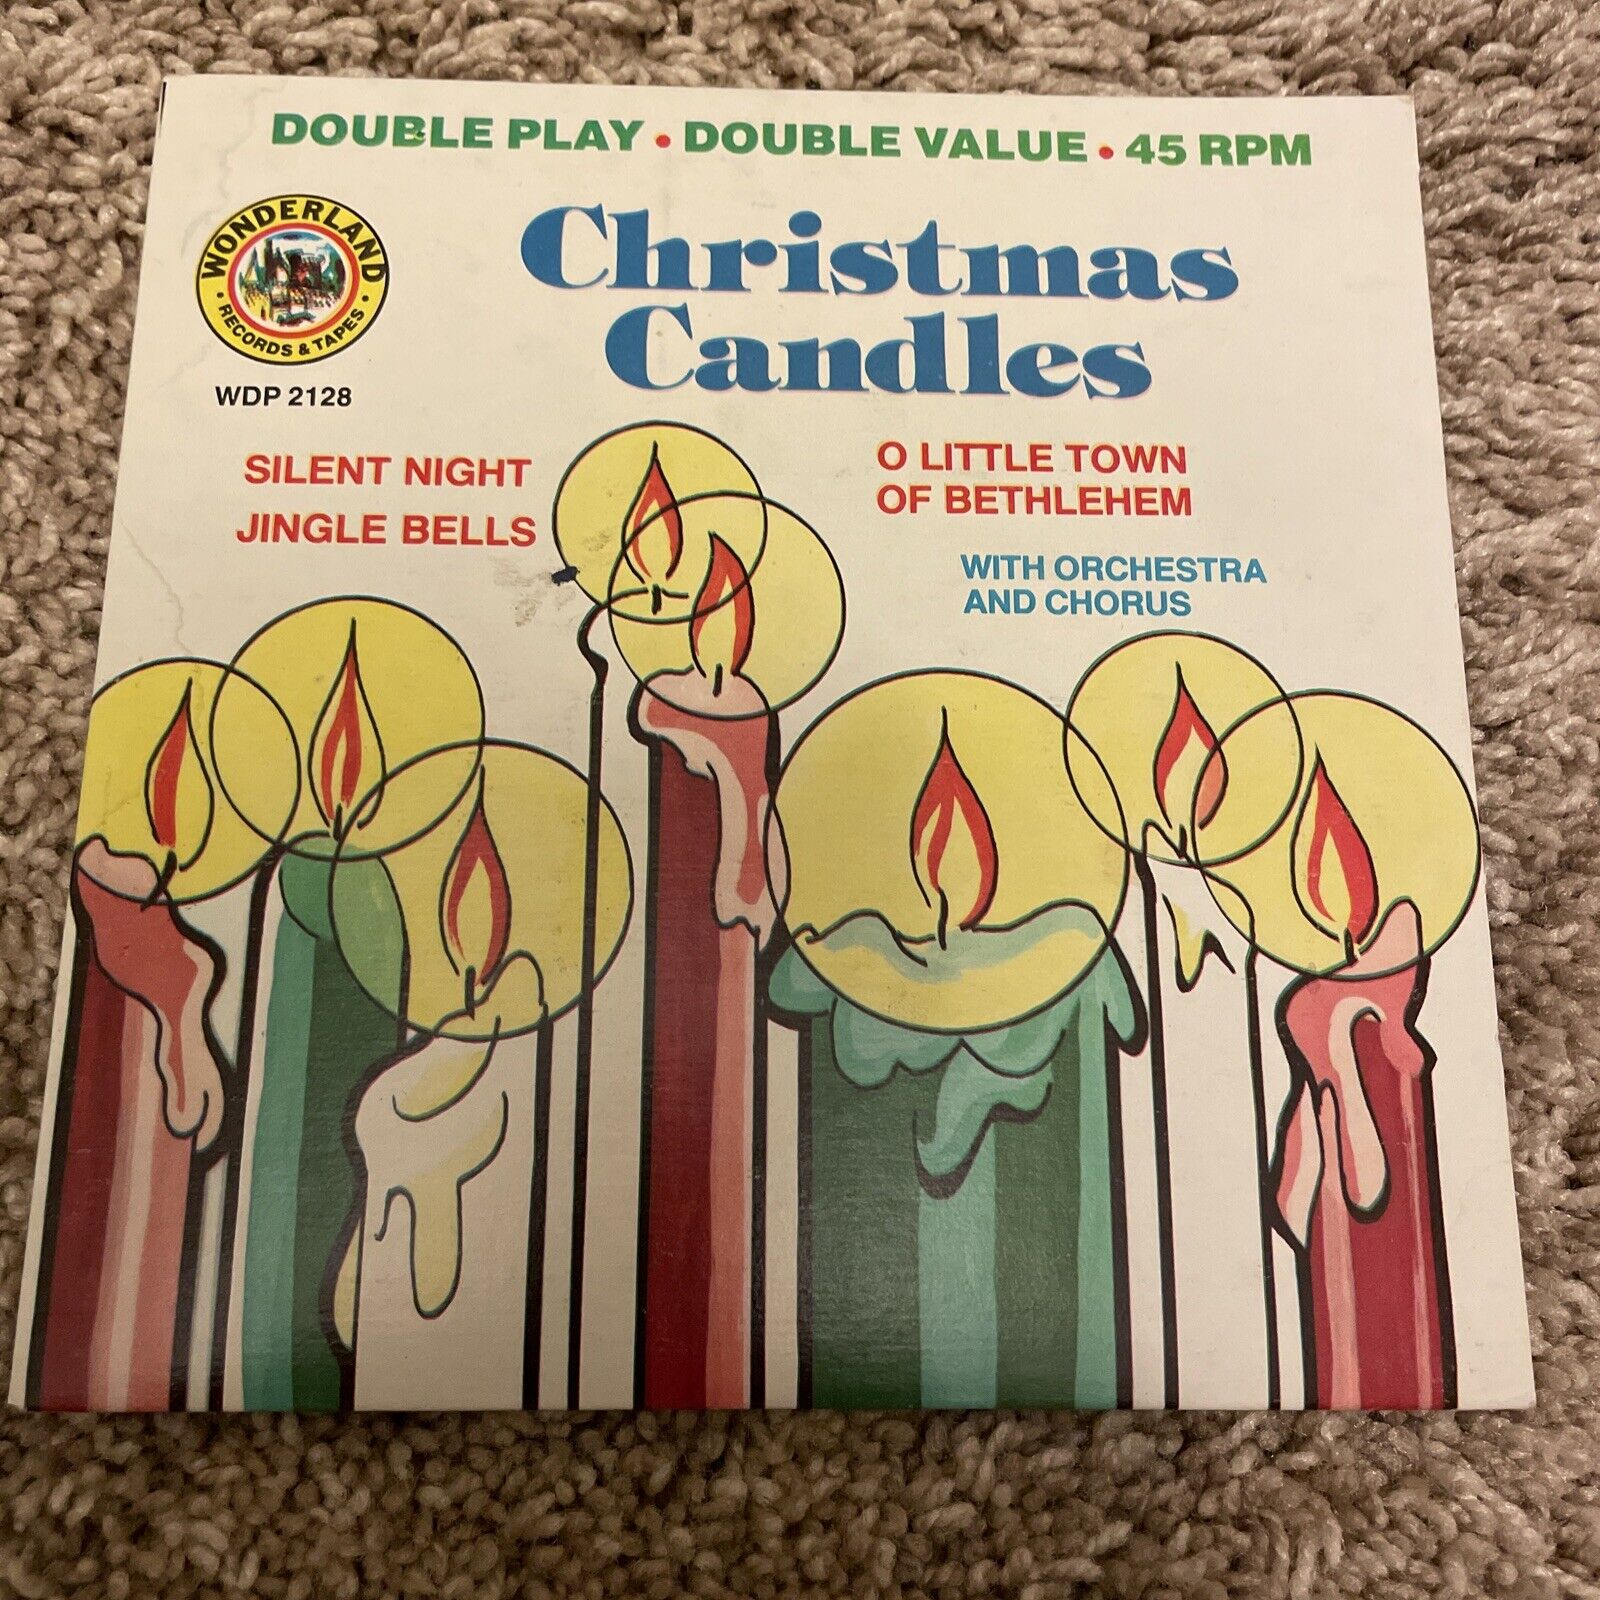 CHRISTMAS CANDLES Wonderland Records 45rpm 60s